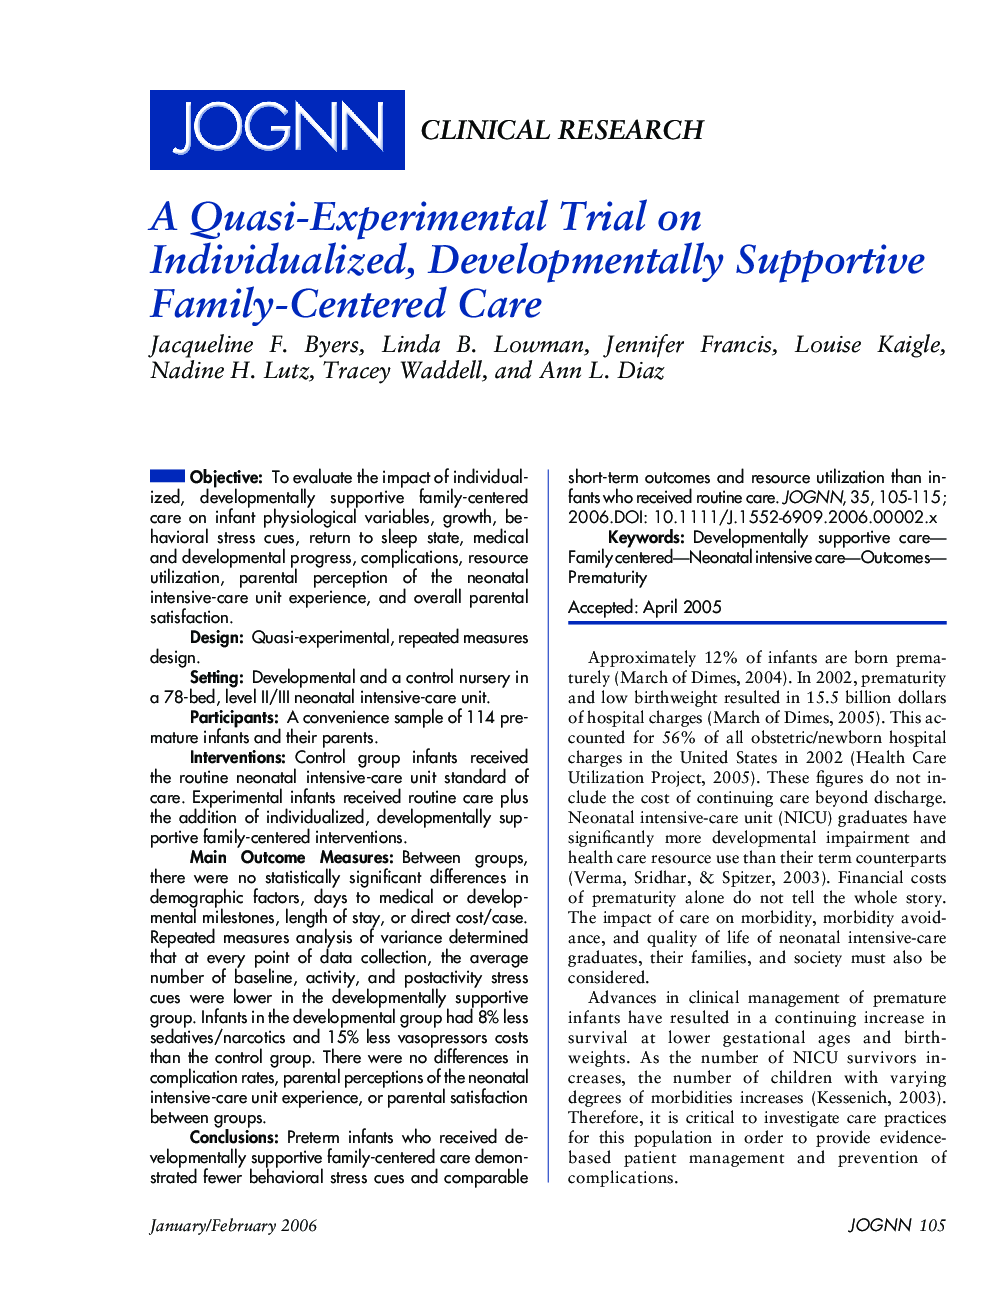 A Quasi-Experimental Trial on Individualized, Developmentally Supportive Family-Centered Care